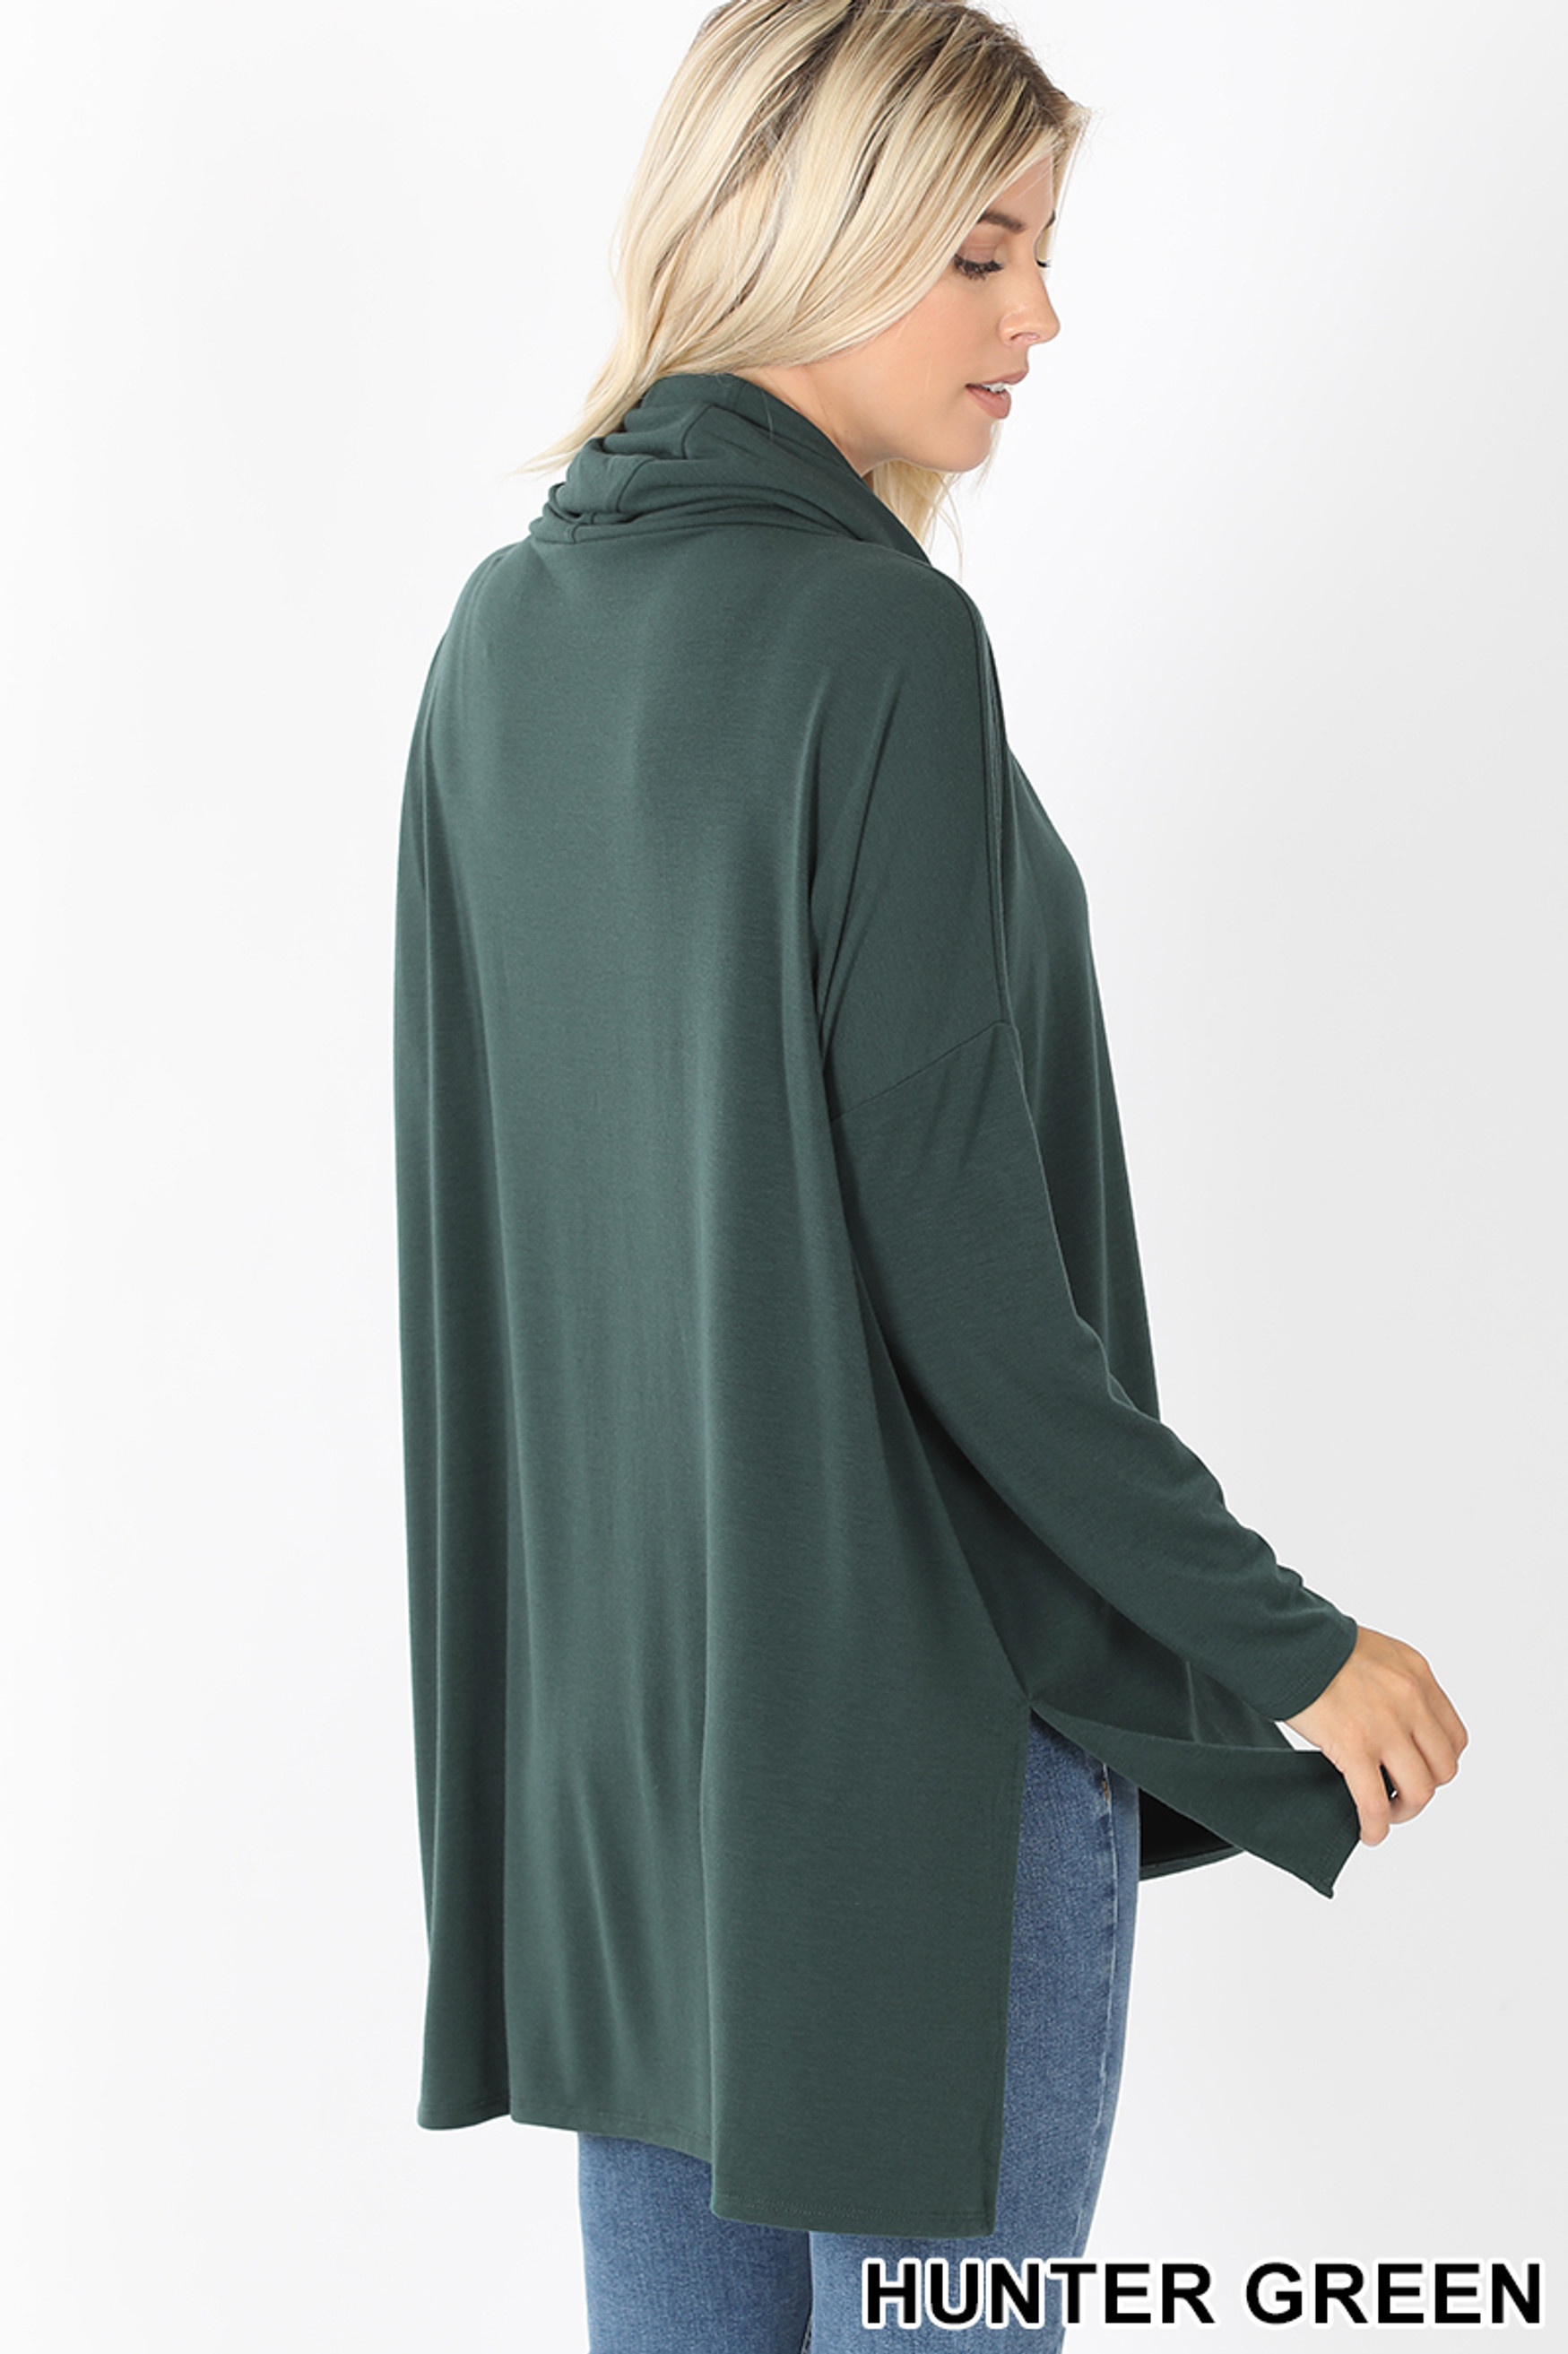 45 Degree Rear Facing Image of Hunter Cowl Neck Hi-Low Long Sleeve Plus Size Top